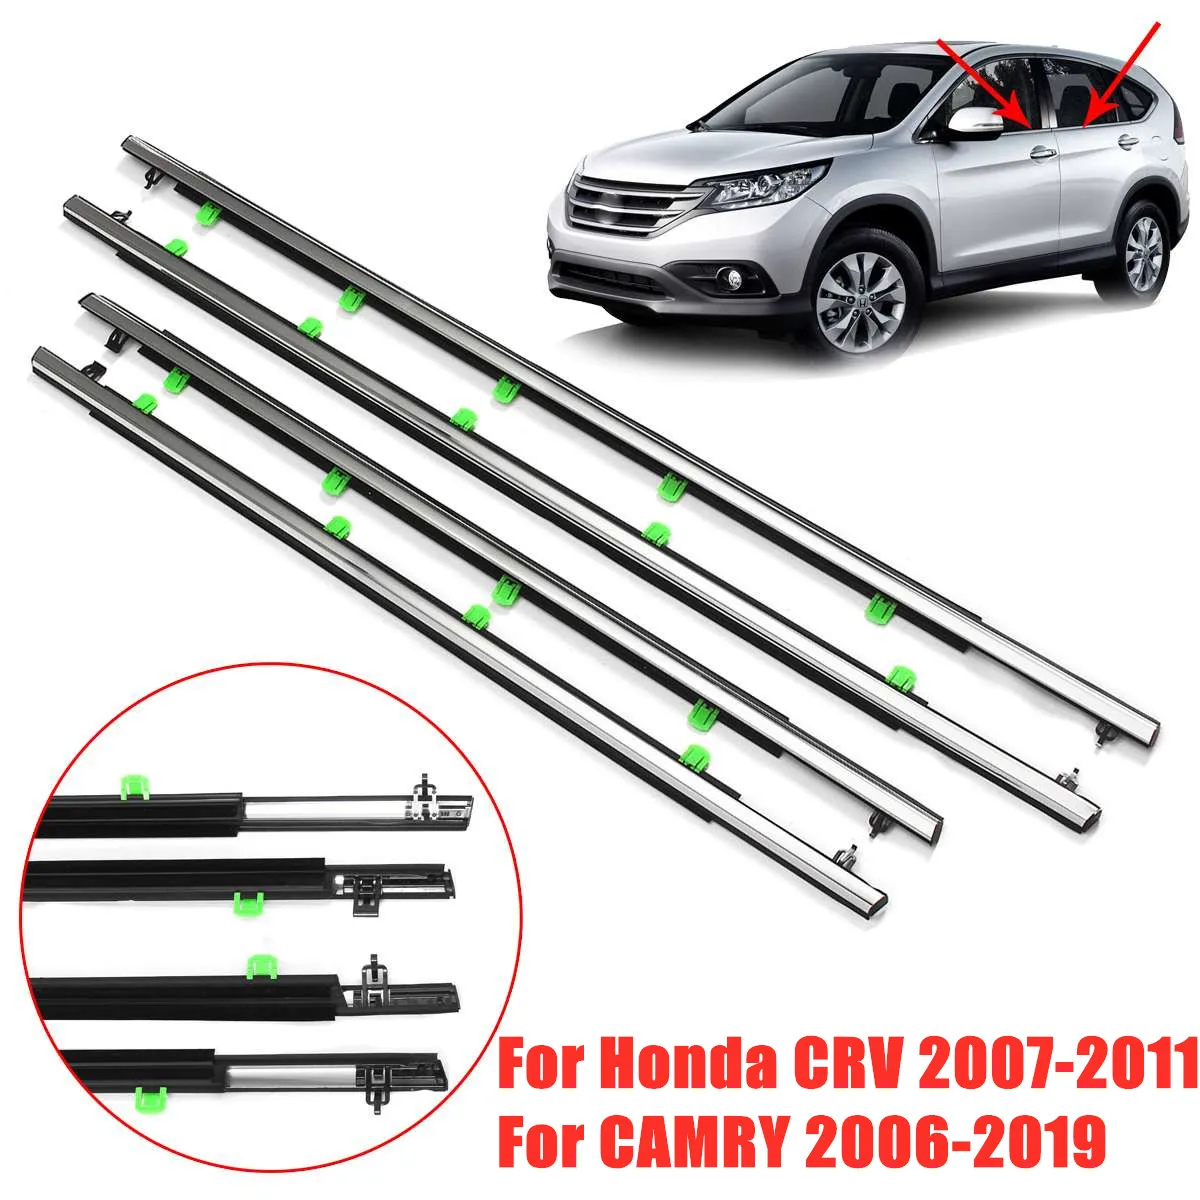 

4pcs Weatherstrip For Honda CRV 2007-2011 Car Outer Window Seal Rubber Strip Moulding Trim Seal Belt For TOYOTA CAMRY 2016-2014